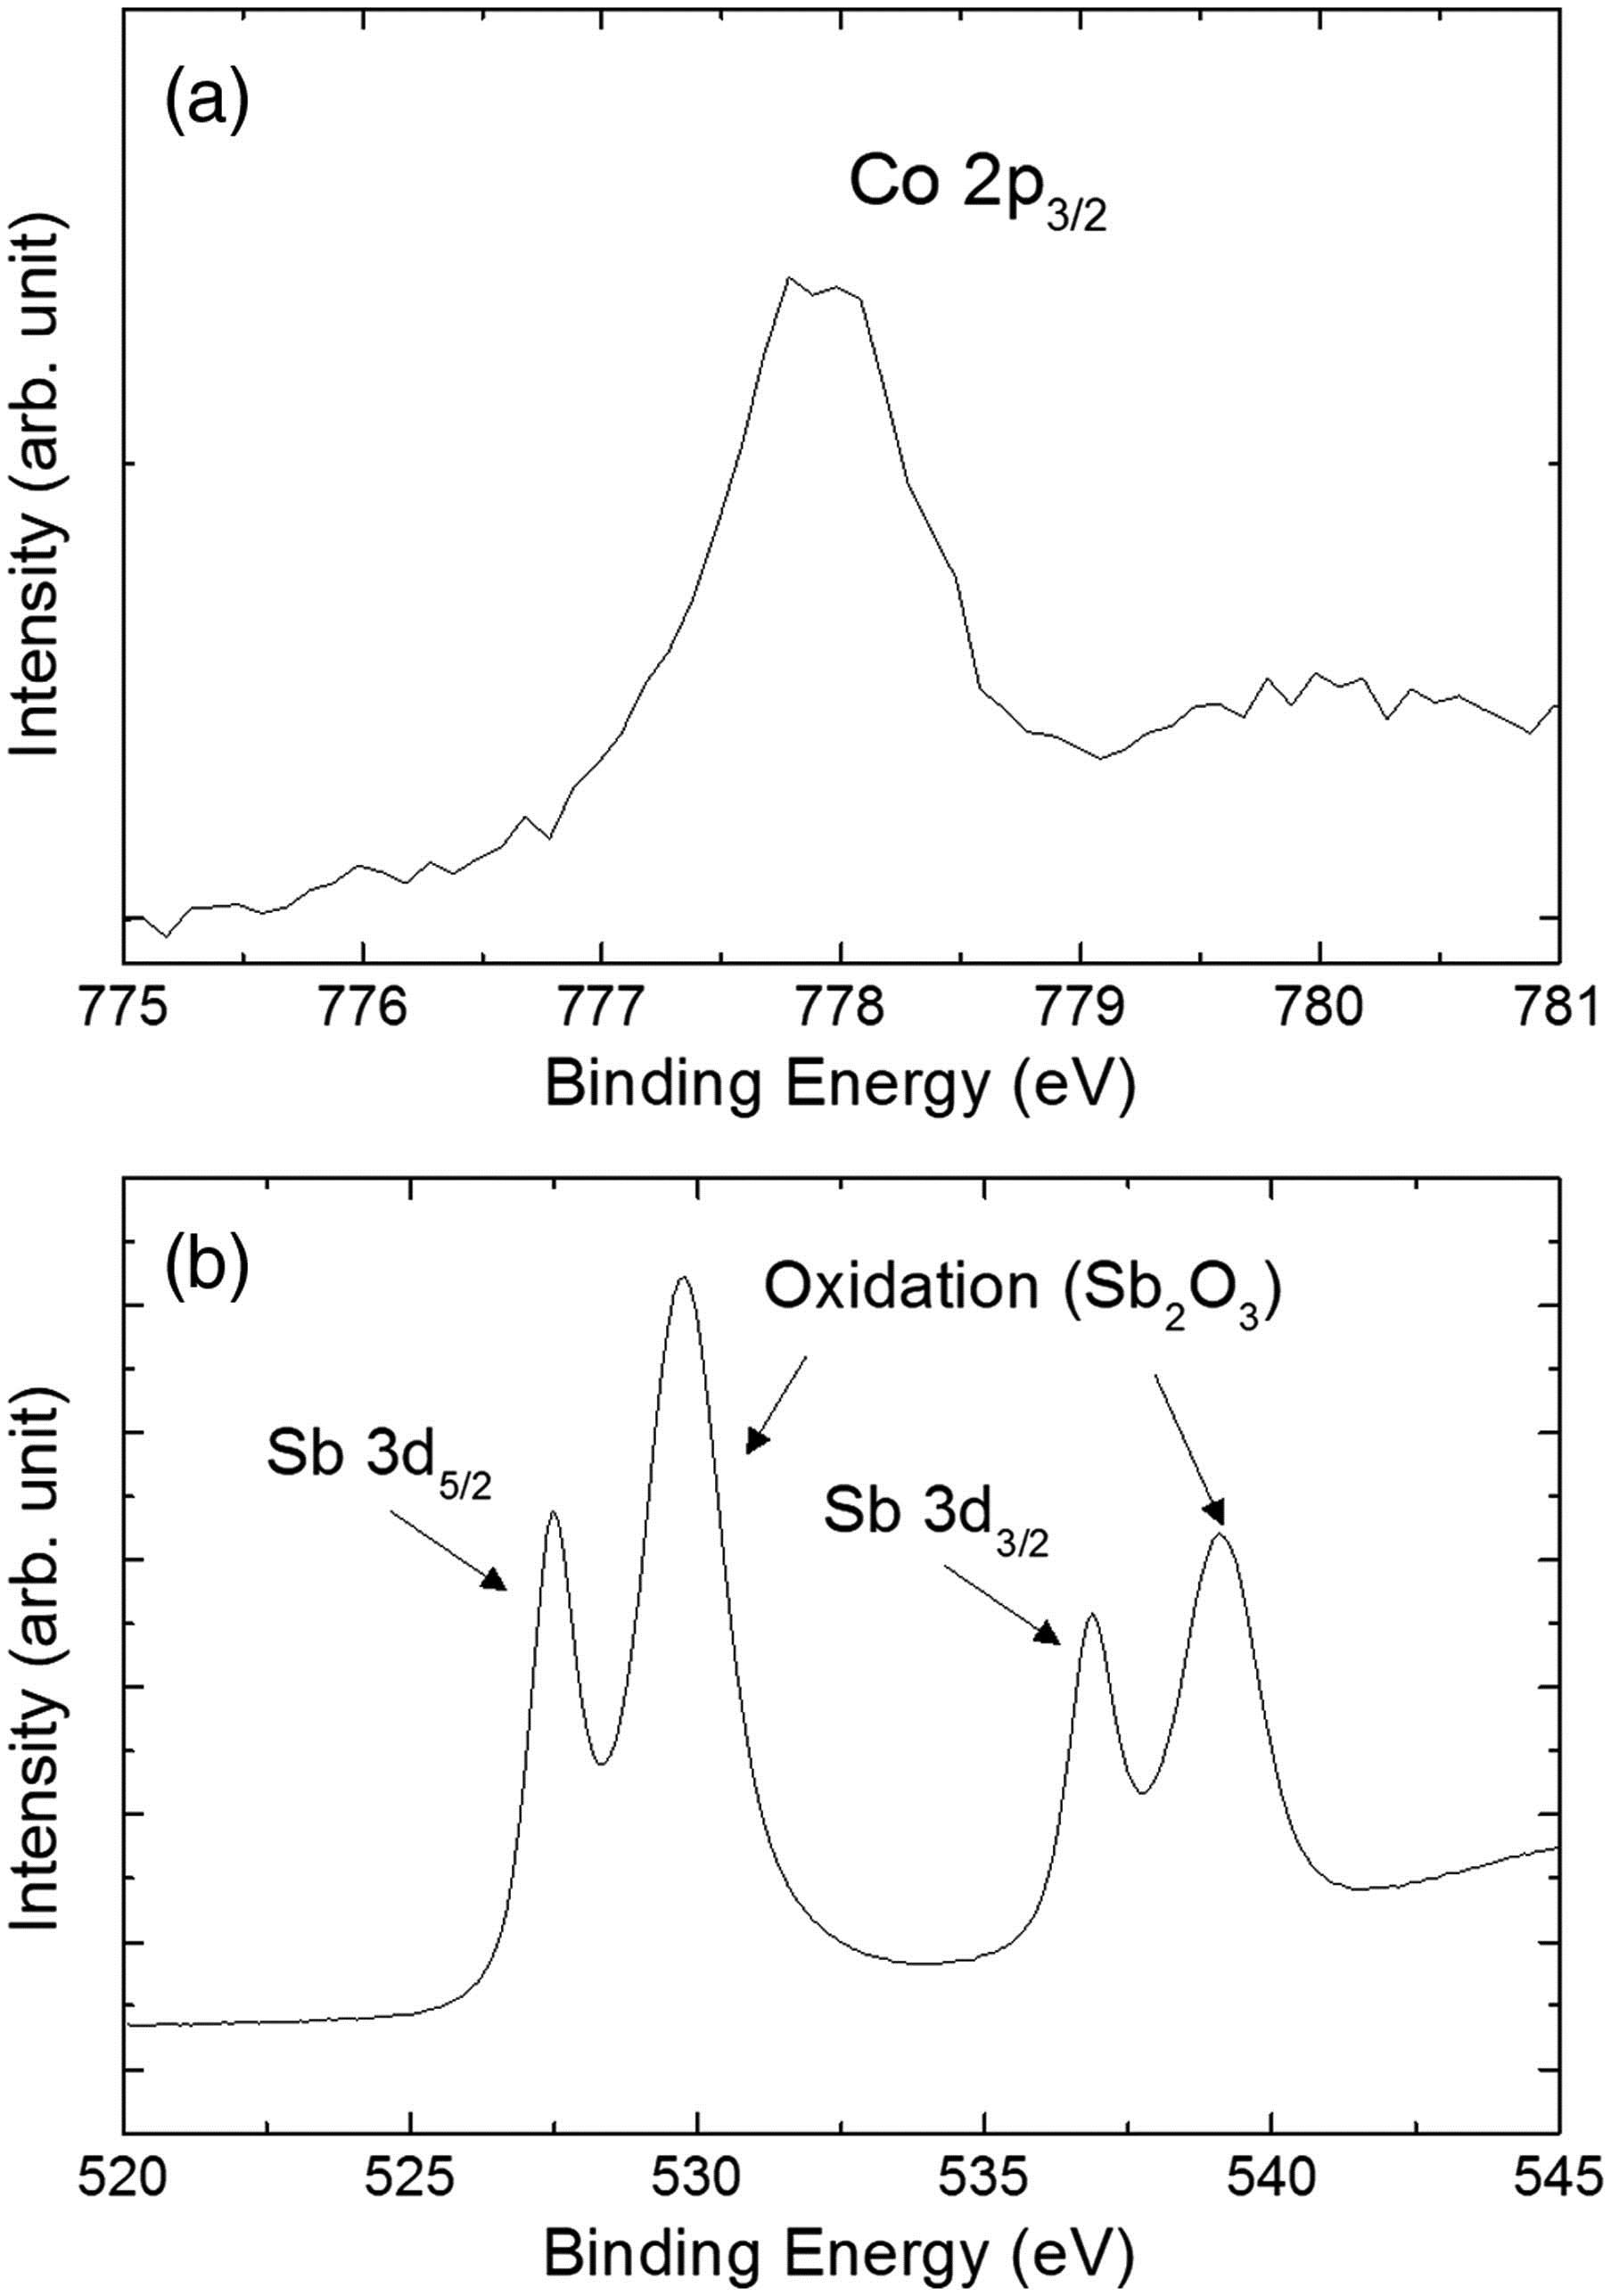 Measured X-ray photoelectron spectroscopy (XPS) profiles: (a) cobalt (Co) 2p spectrum and (b) antimony (Sb) 3d spectrum of the CoSb3 particle.